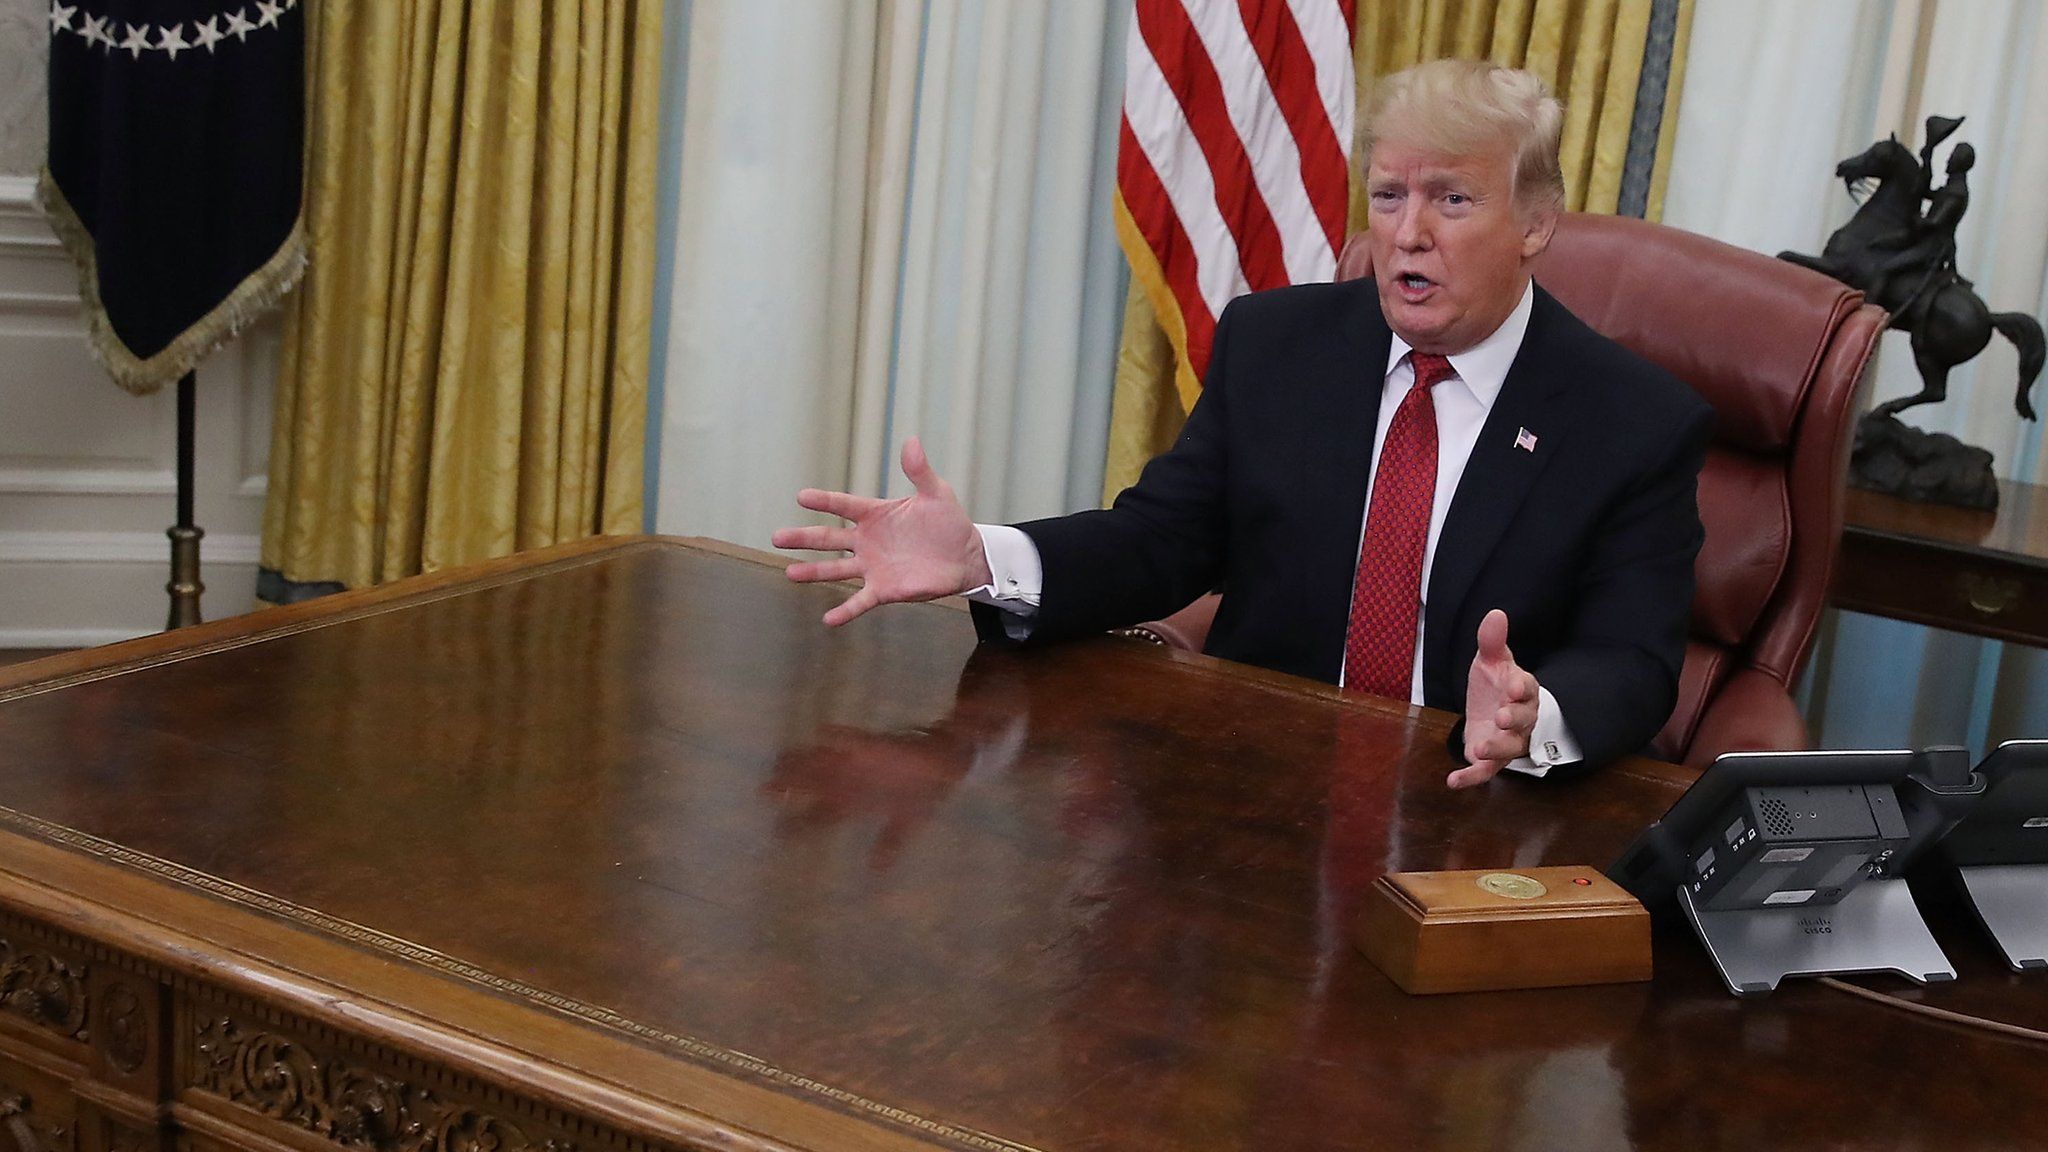 U.S. President Donald Trump speaks during a meeting with Chinese Vice Premier Liu He, in the Oval Office at the White House on January 31, 2019